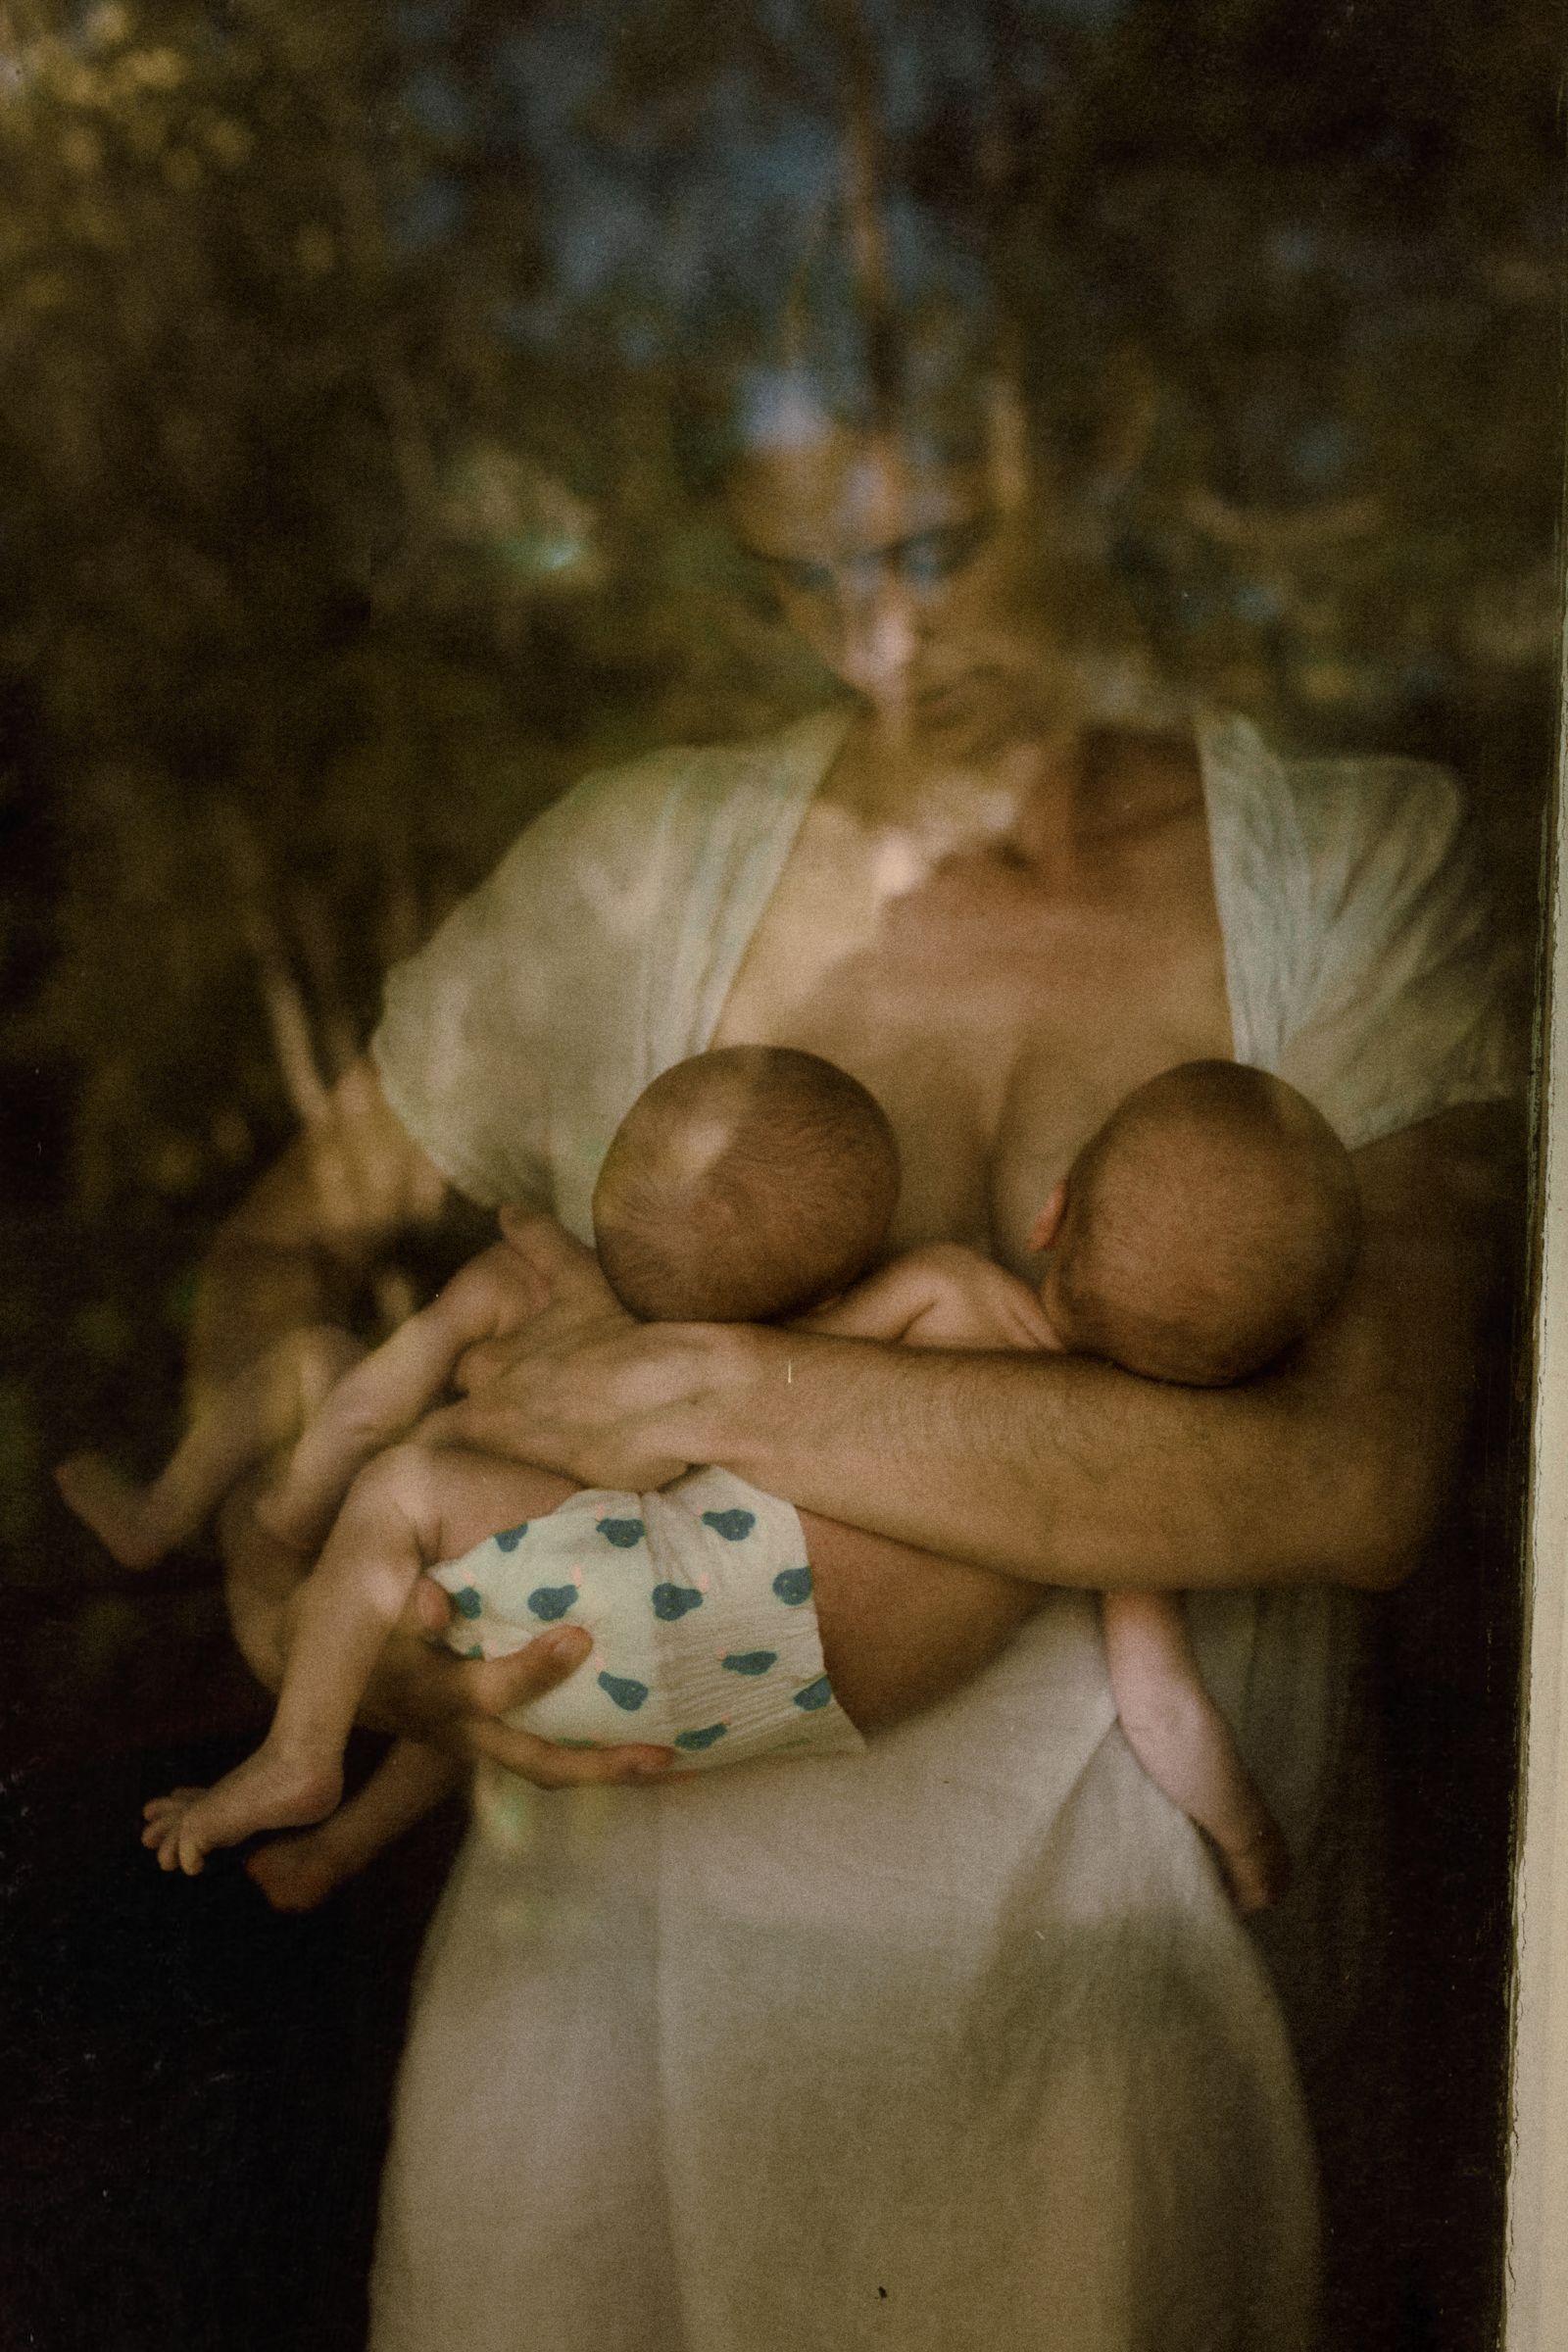 © Lisa Sorgini - Image from the Behind Glass photography project